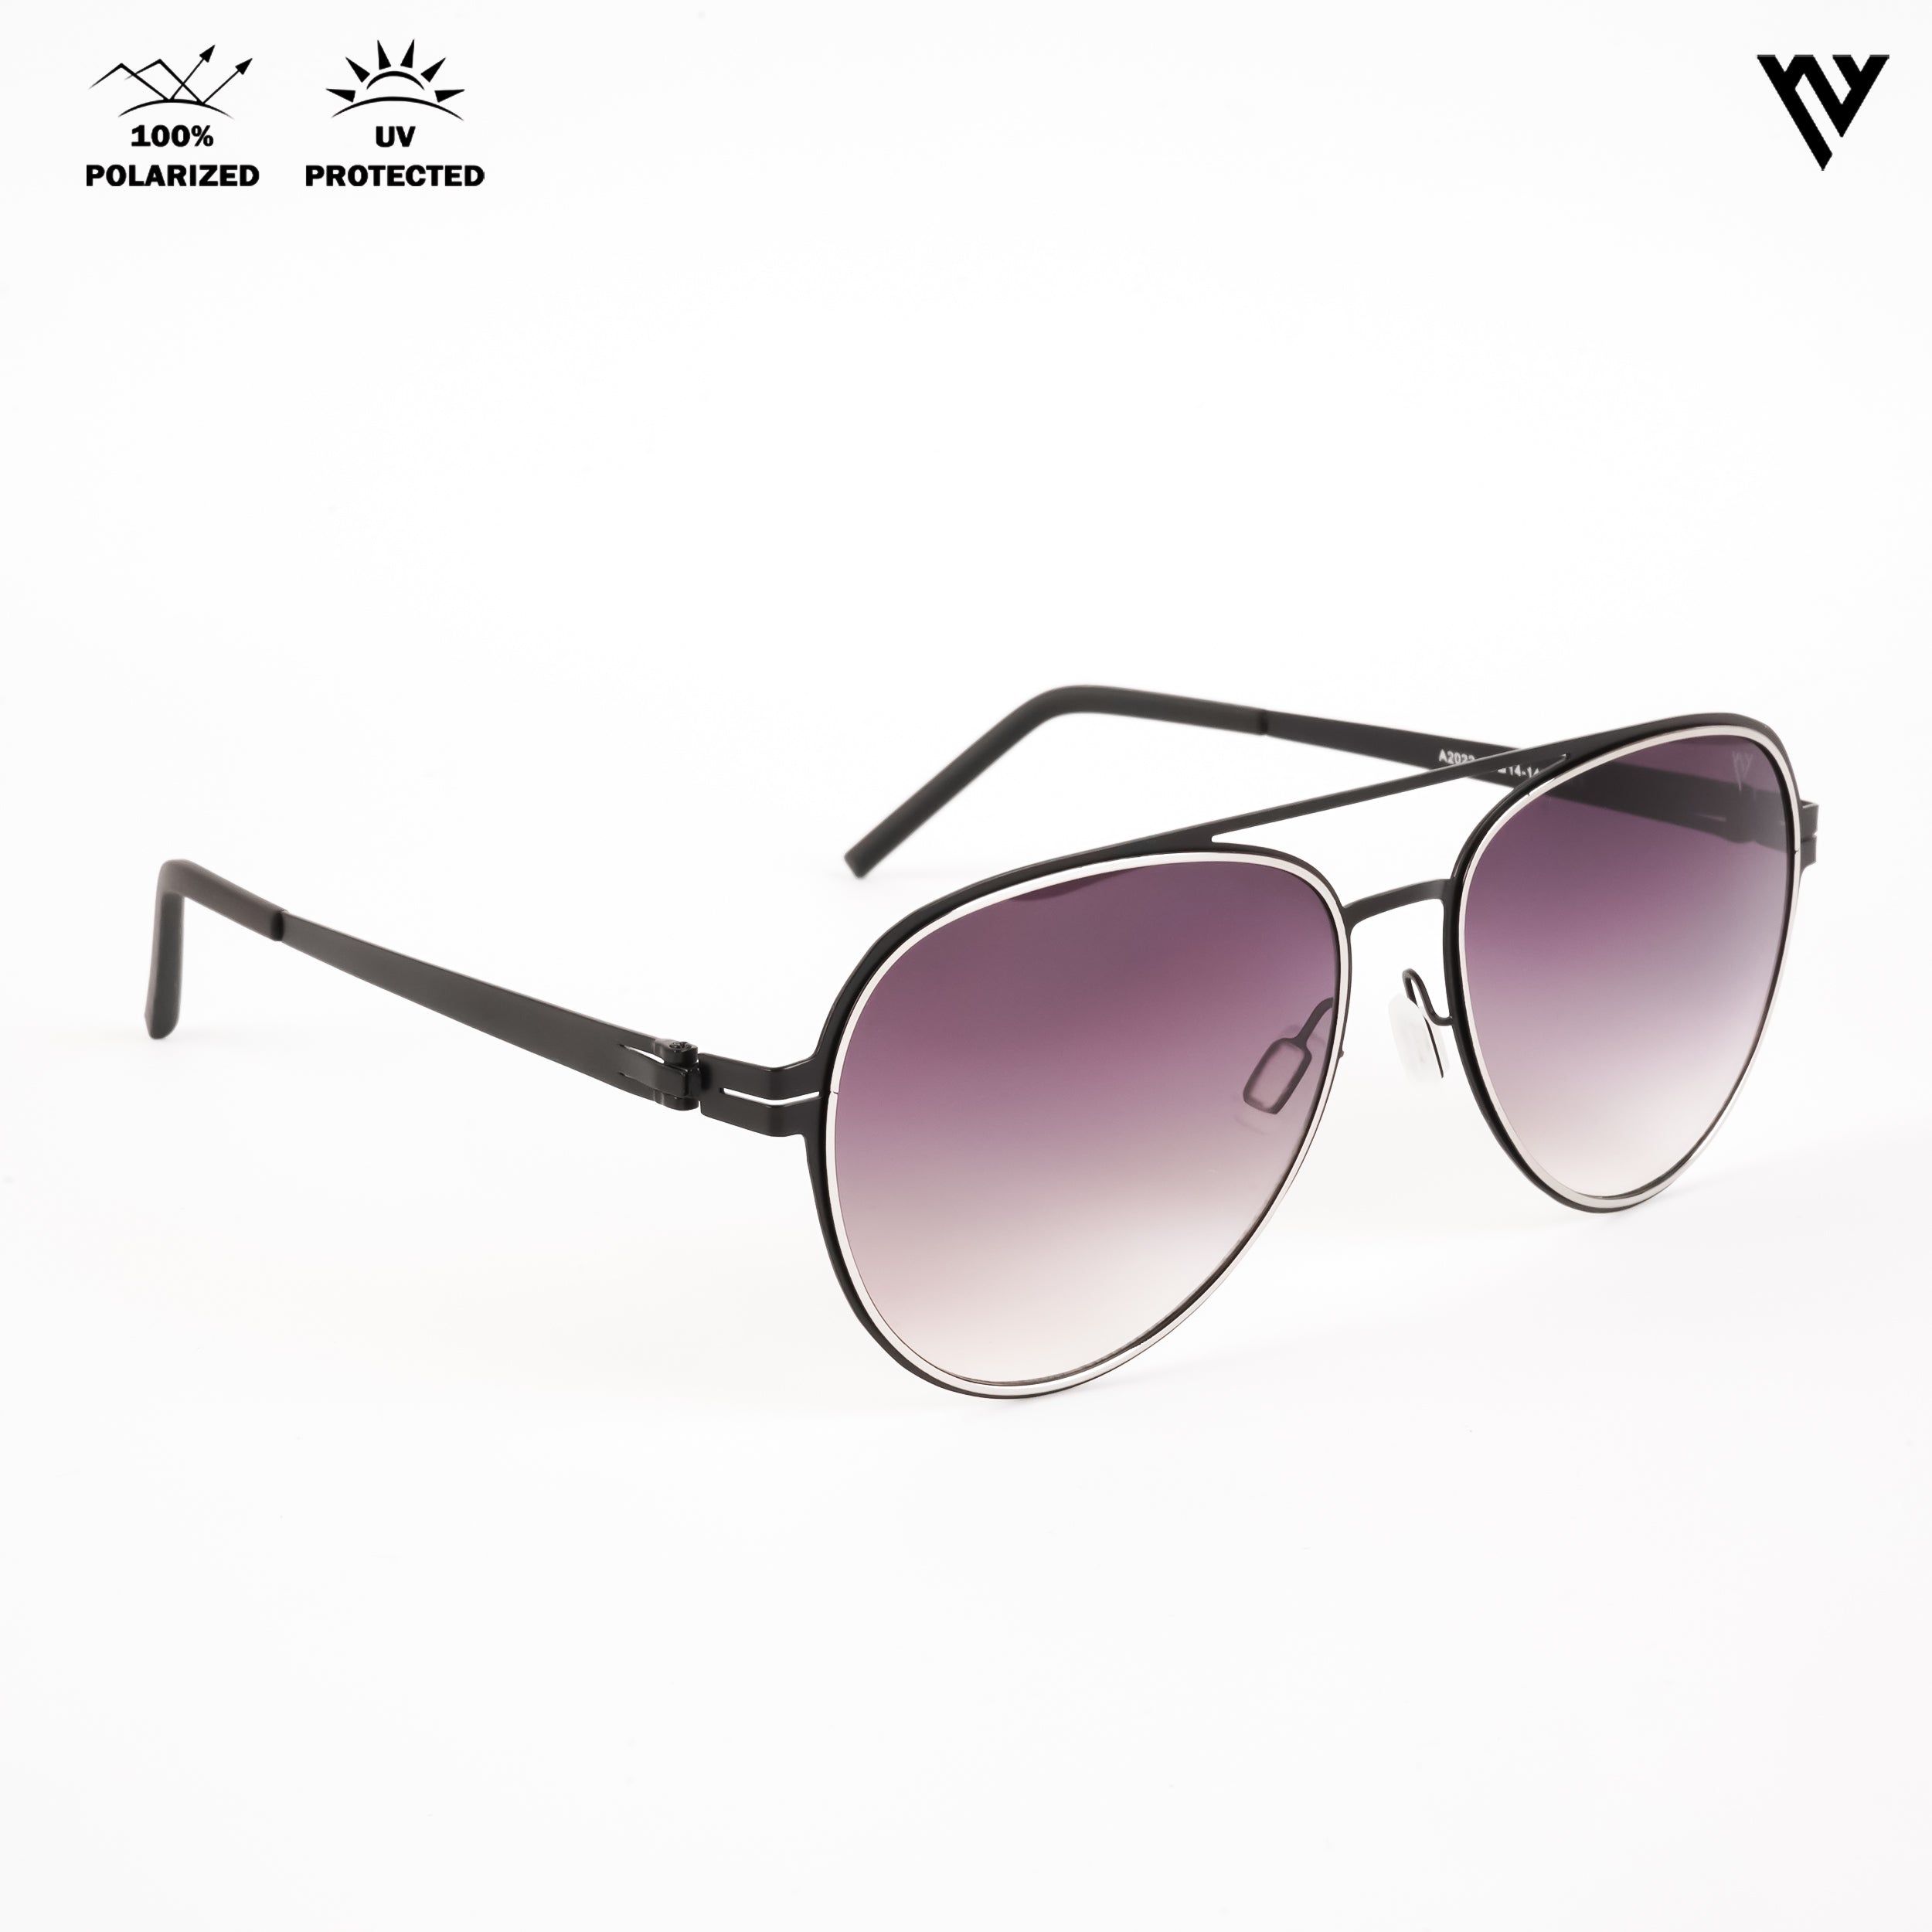 Voyage Exclusive Black & Silver Polarized Aviator Sunglasses for Men & Women (A2022MG4291)